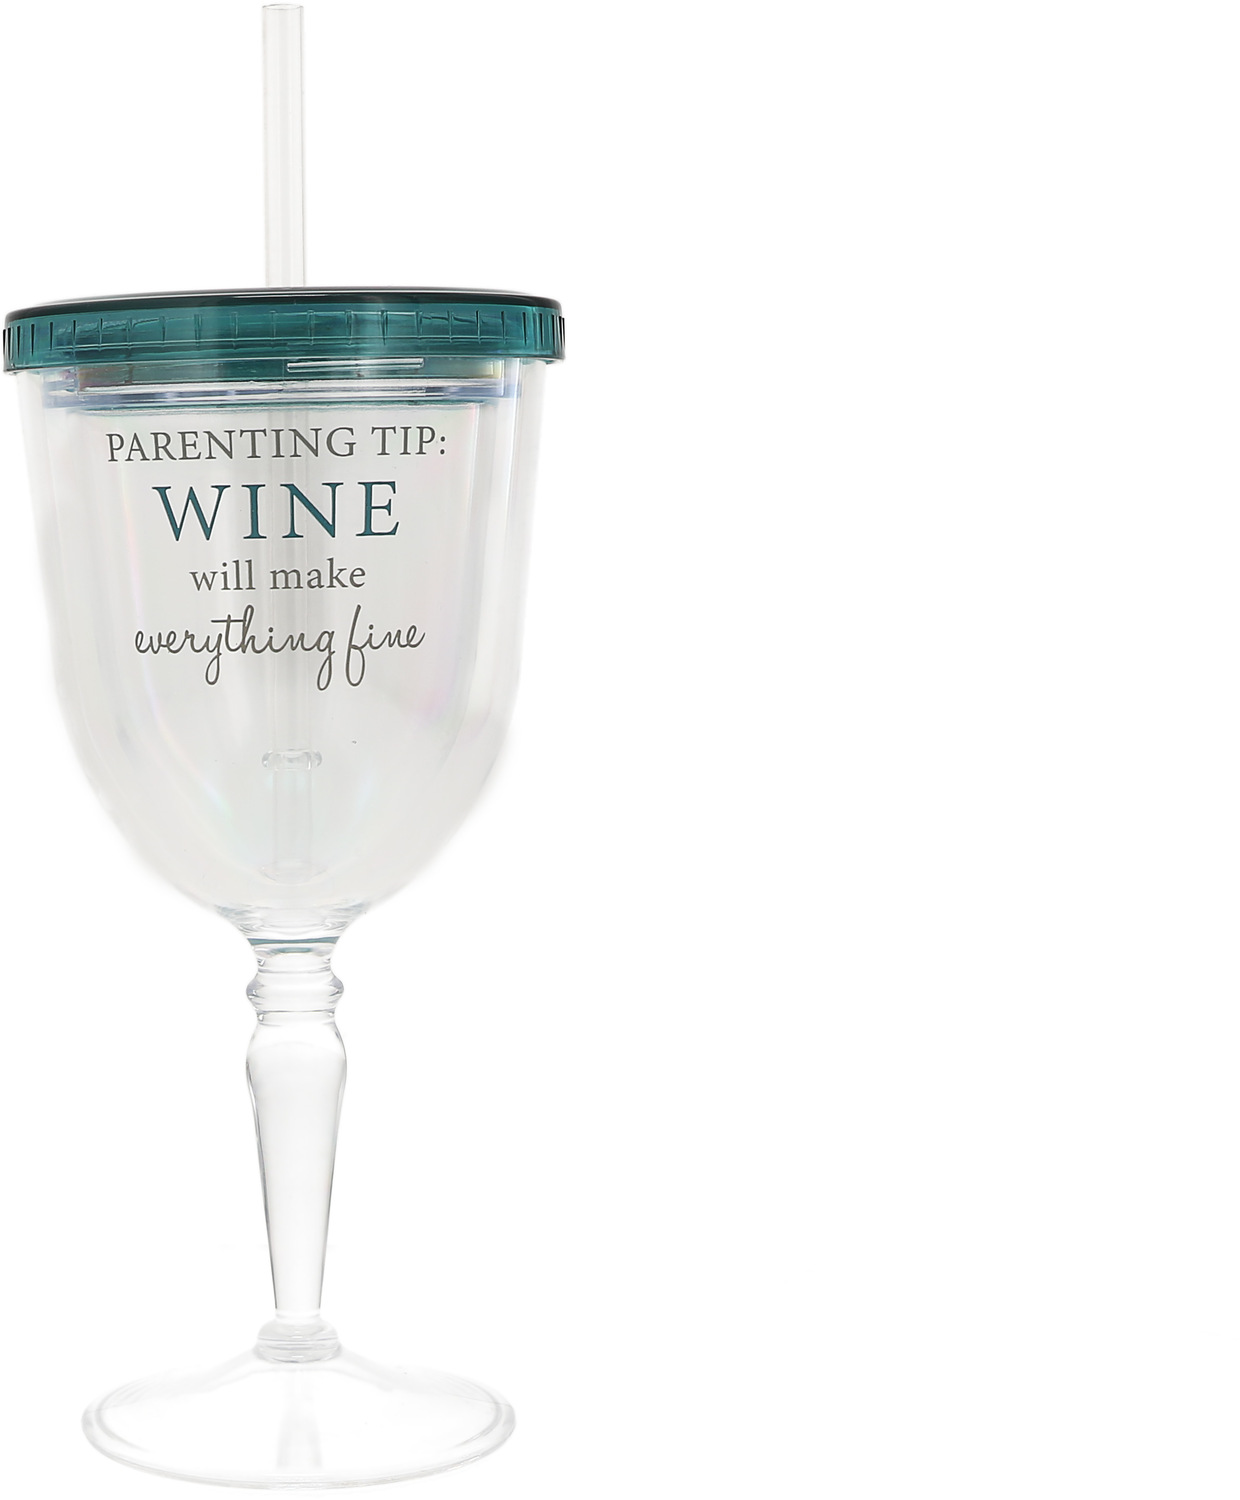 Parenting Tip by A-Parent-ly - Parenting Tip - 13 oz Acrylic Wine Tumbler